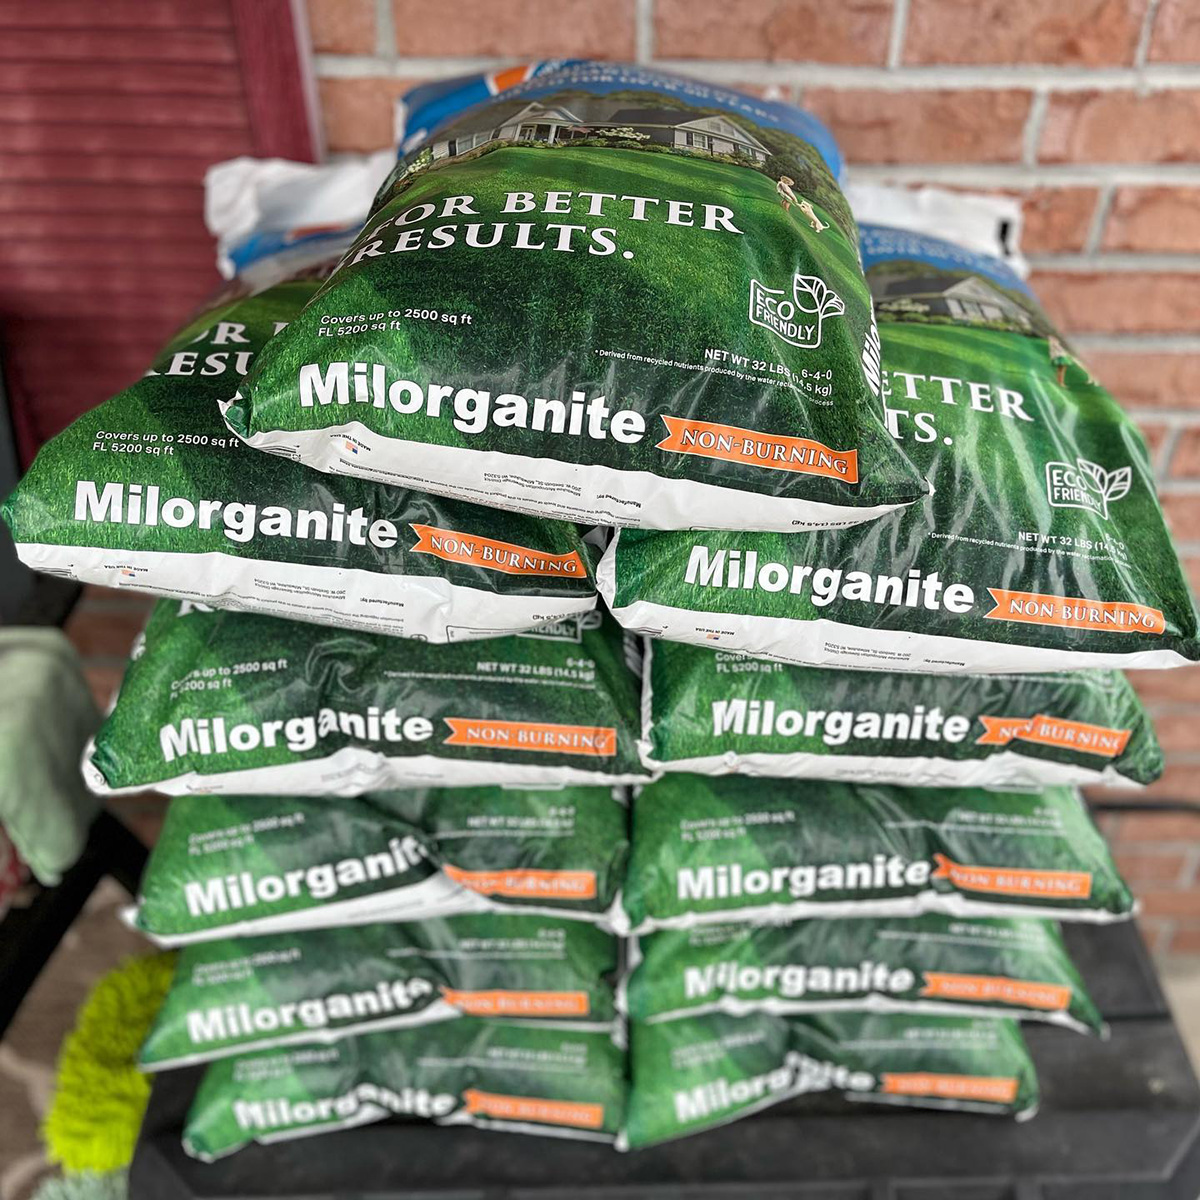 A stack of bags of micronate on a table.